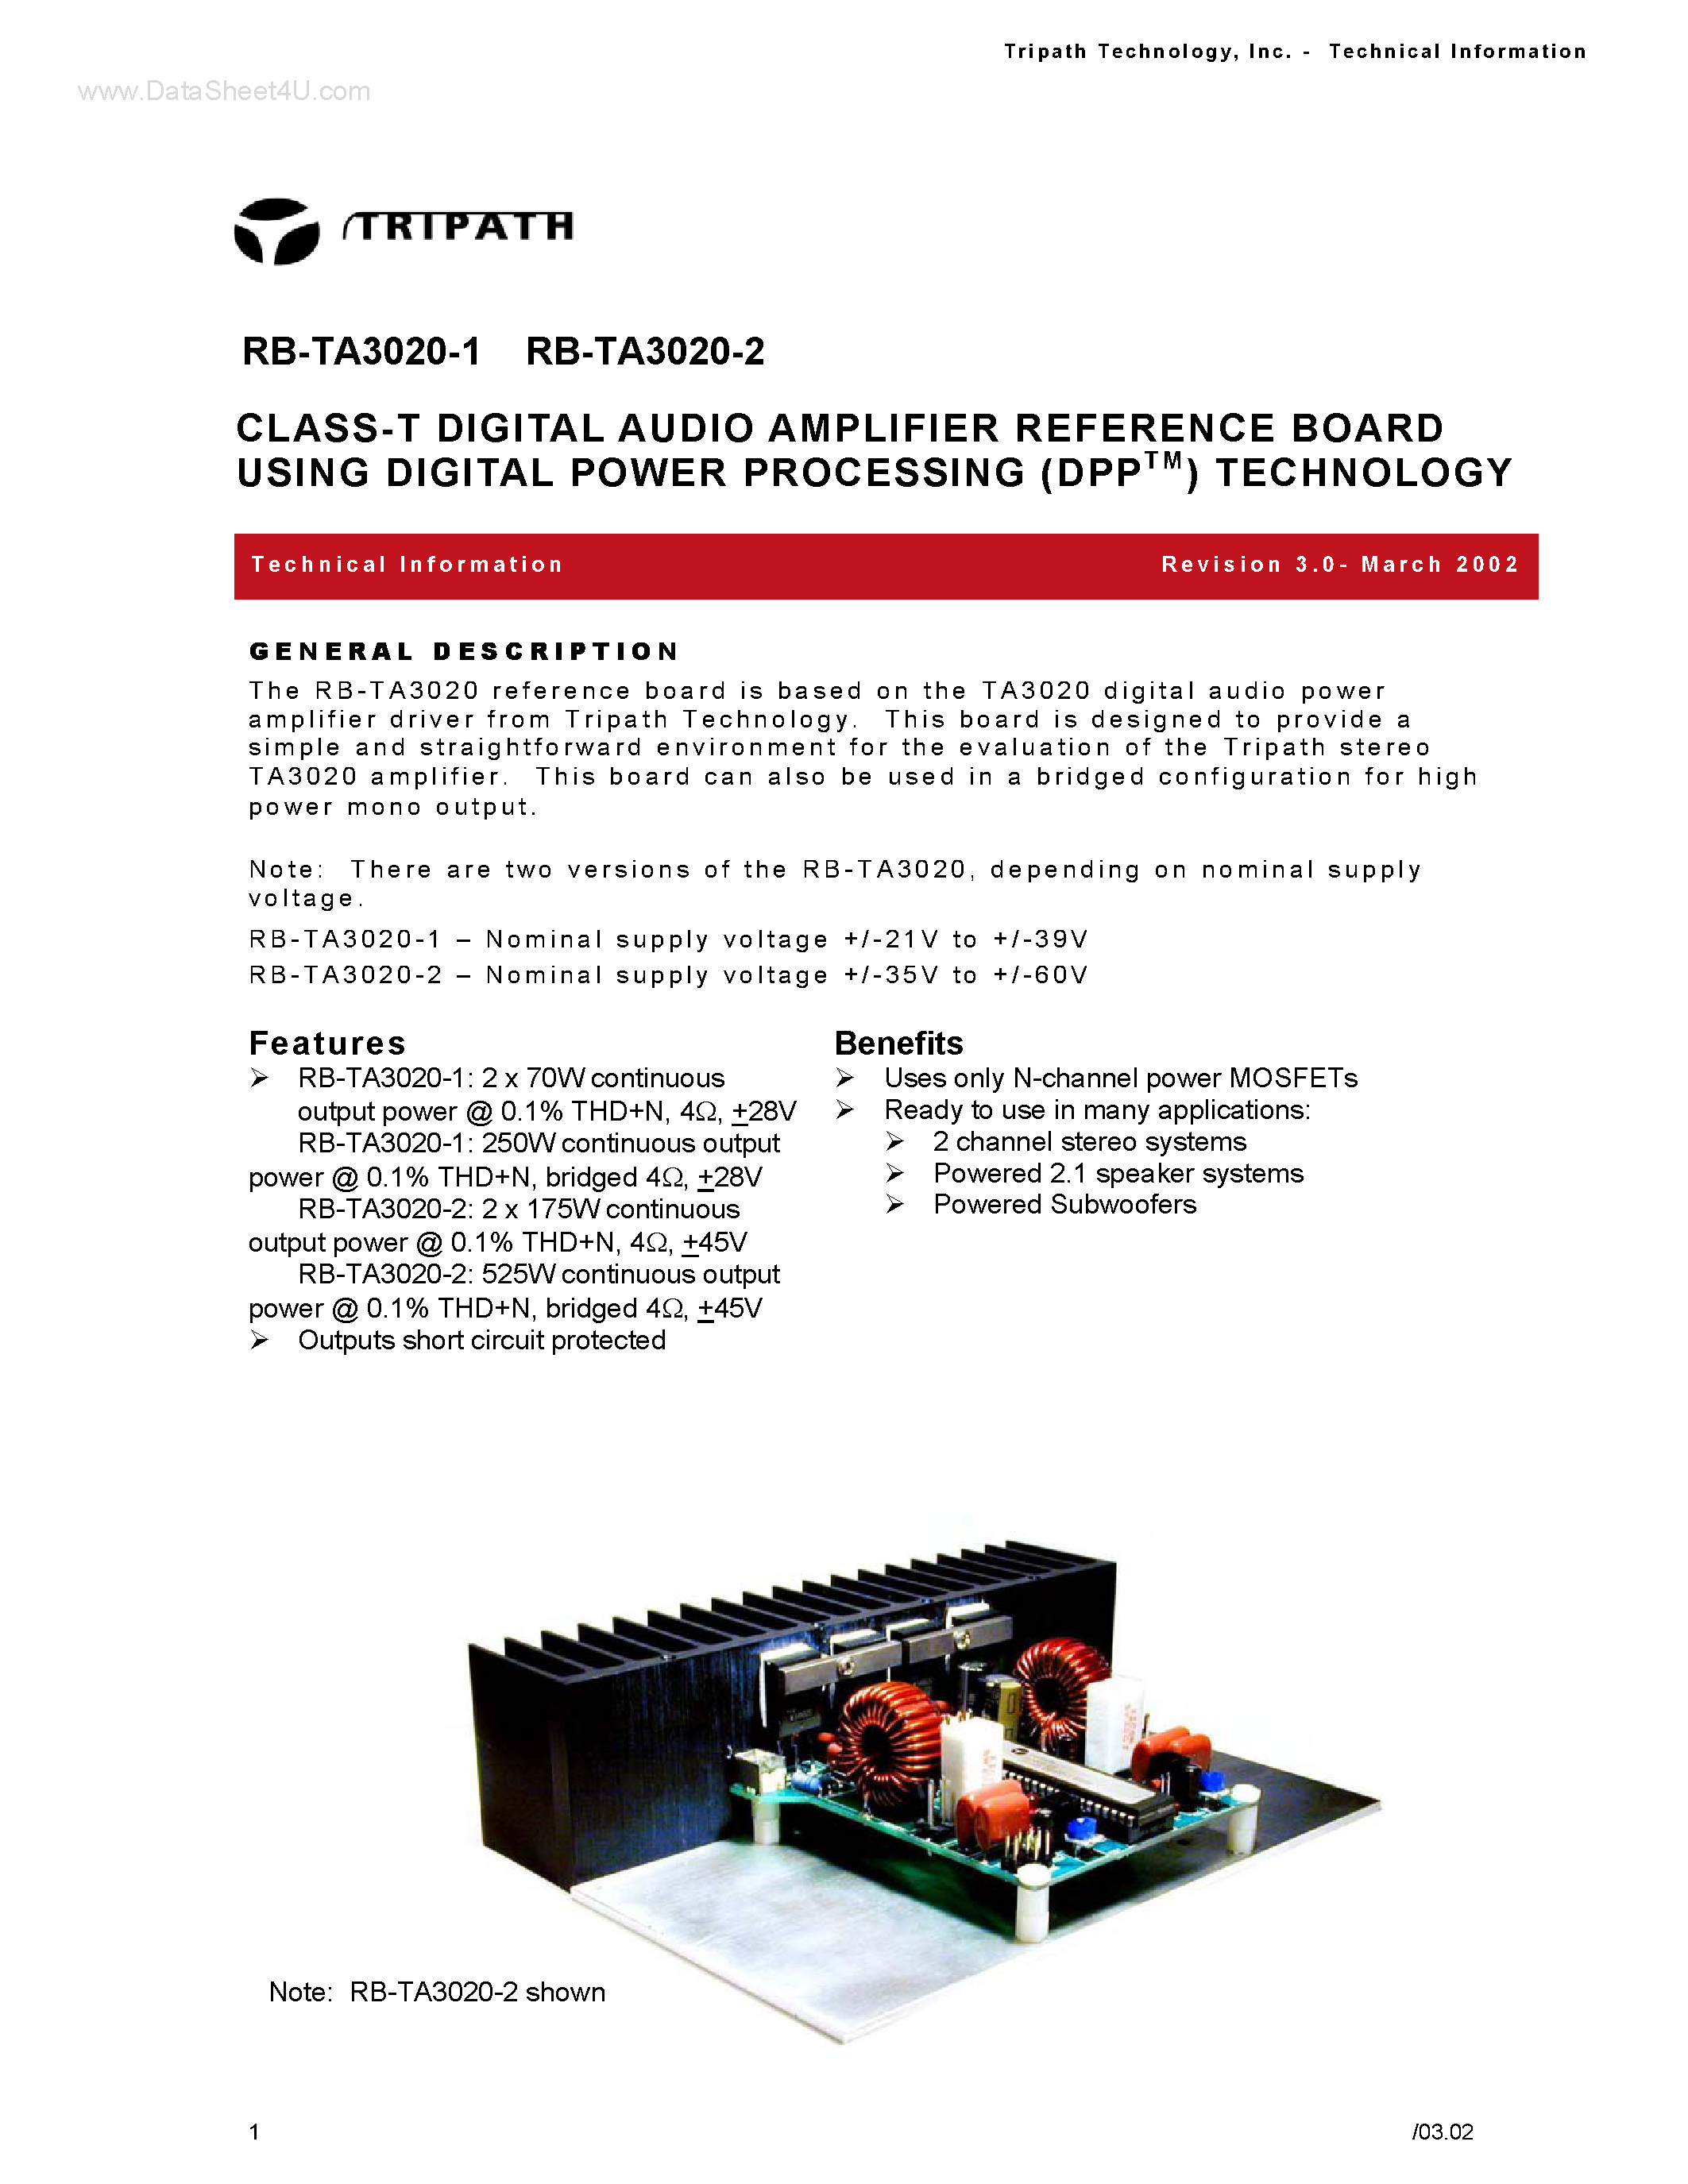 Datasheet RB-TA3020-1 - (RB-TA3020-1/-2) CLASS-T DIGITAL AUDIO AMPLIFIER REFERENCE BOARD page 1